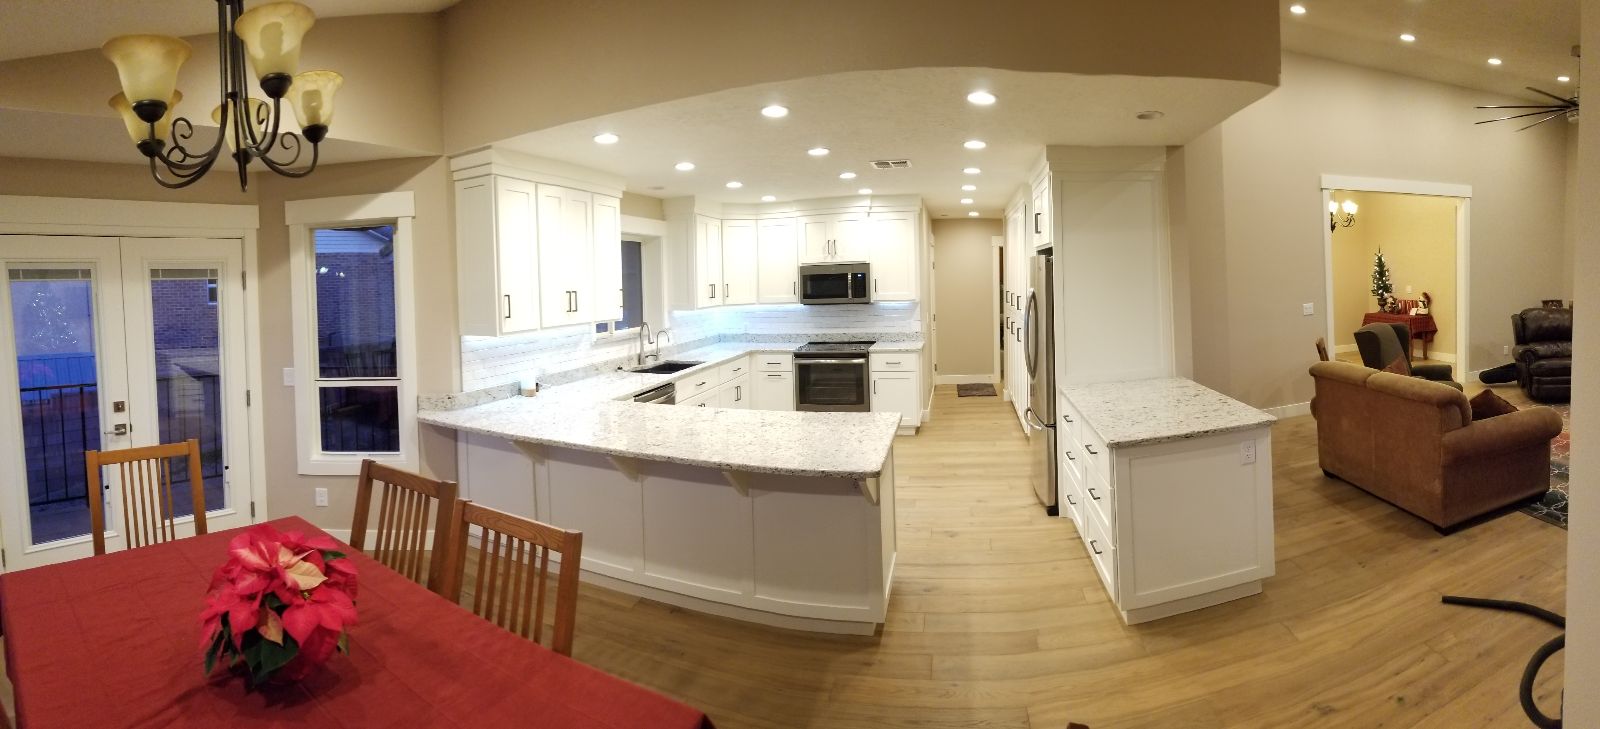 Remodeled Kitchen - Side View